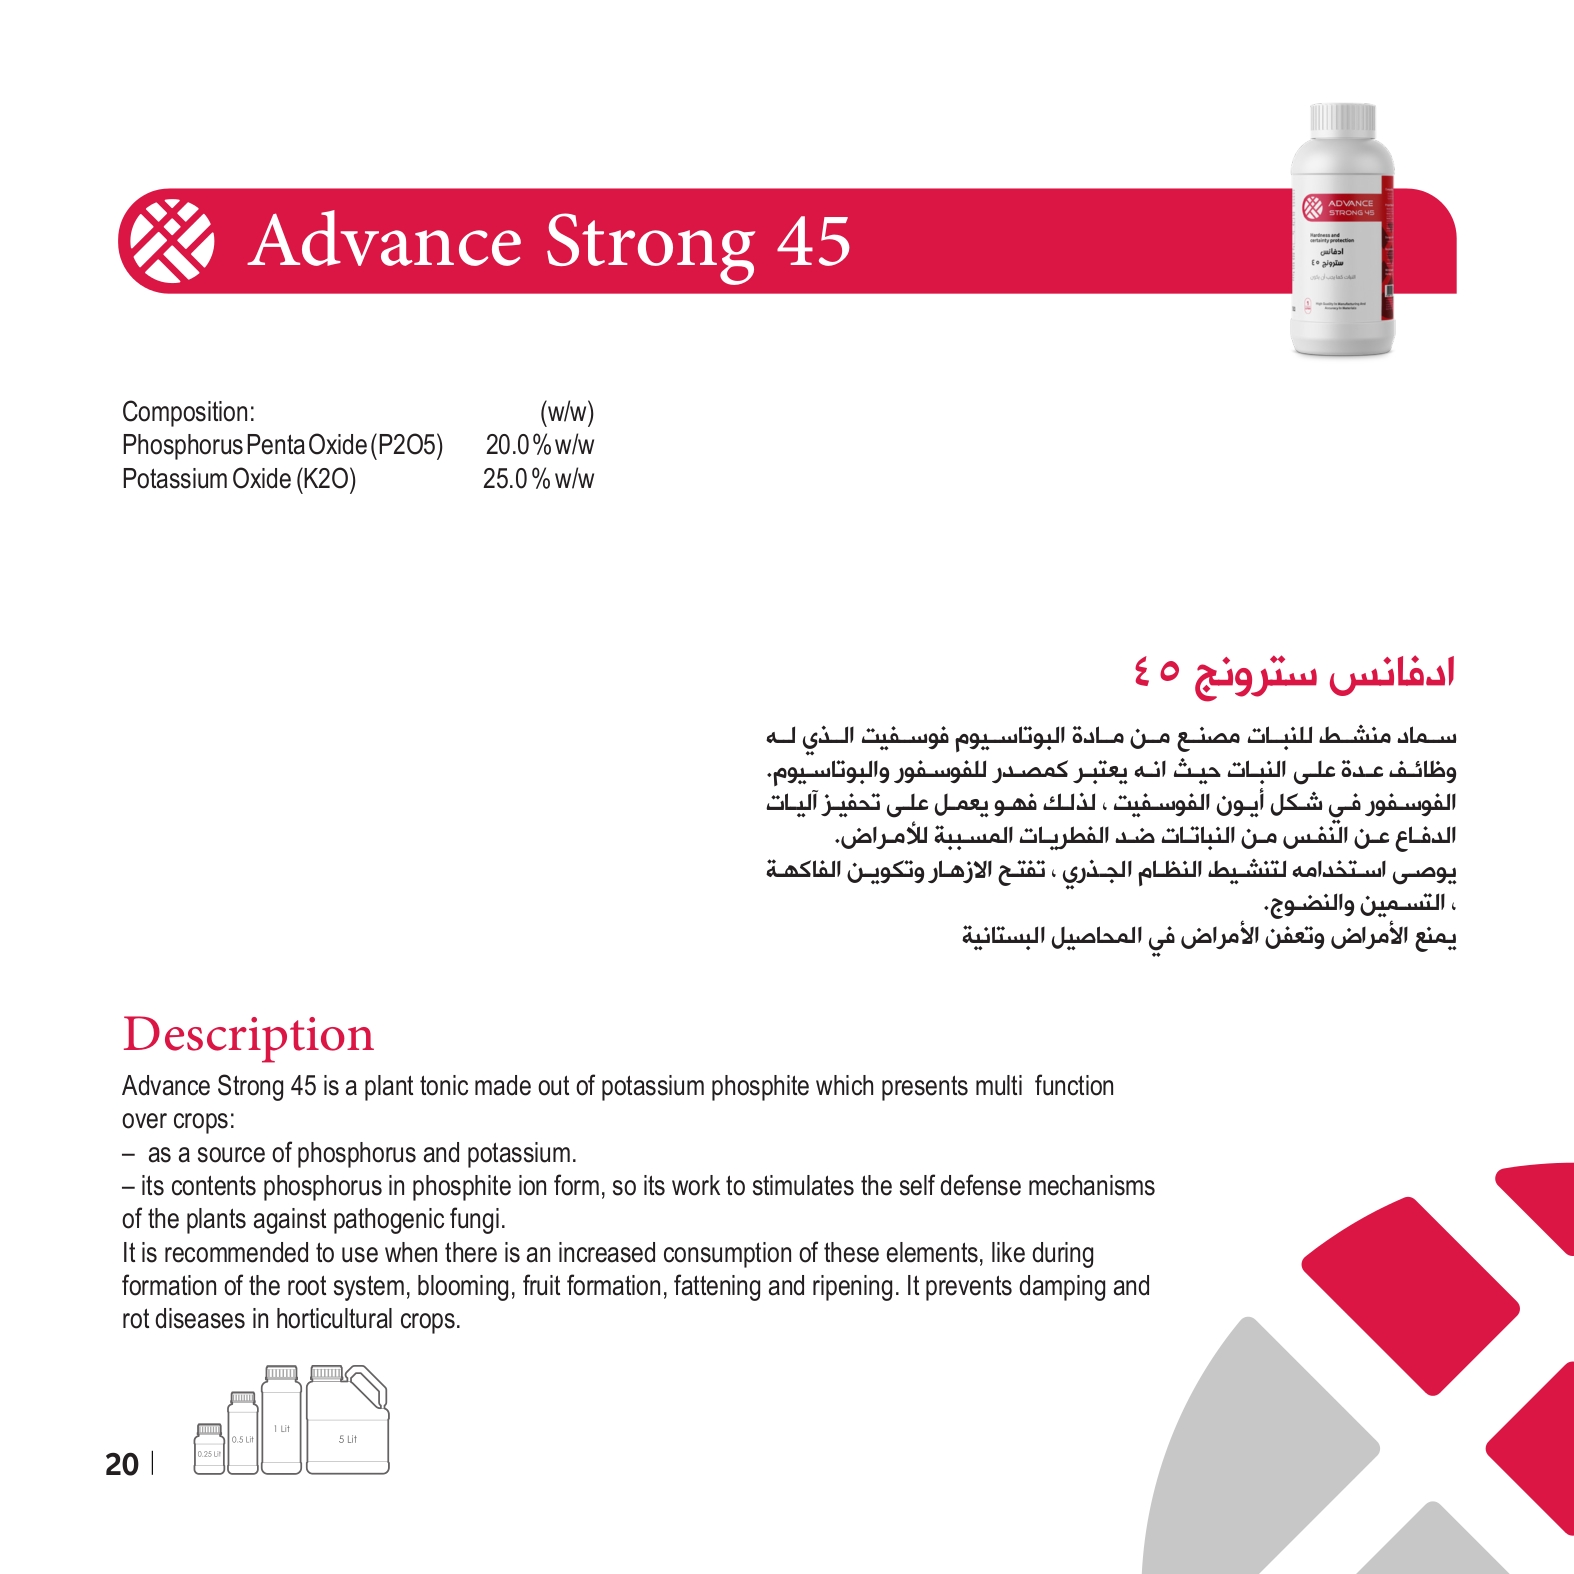 Advance Strong 45